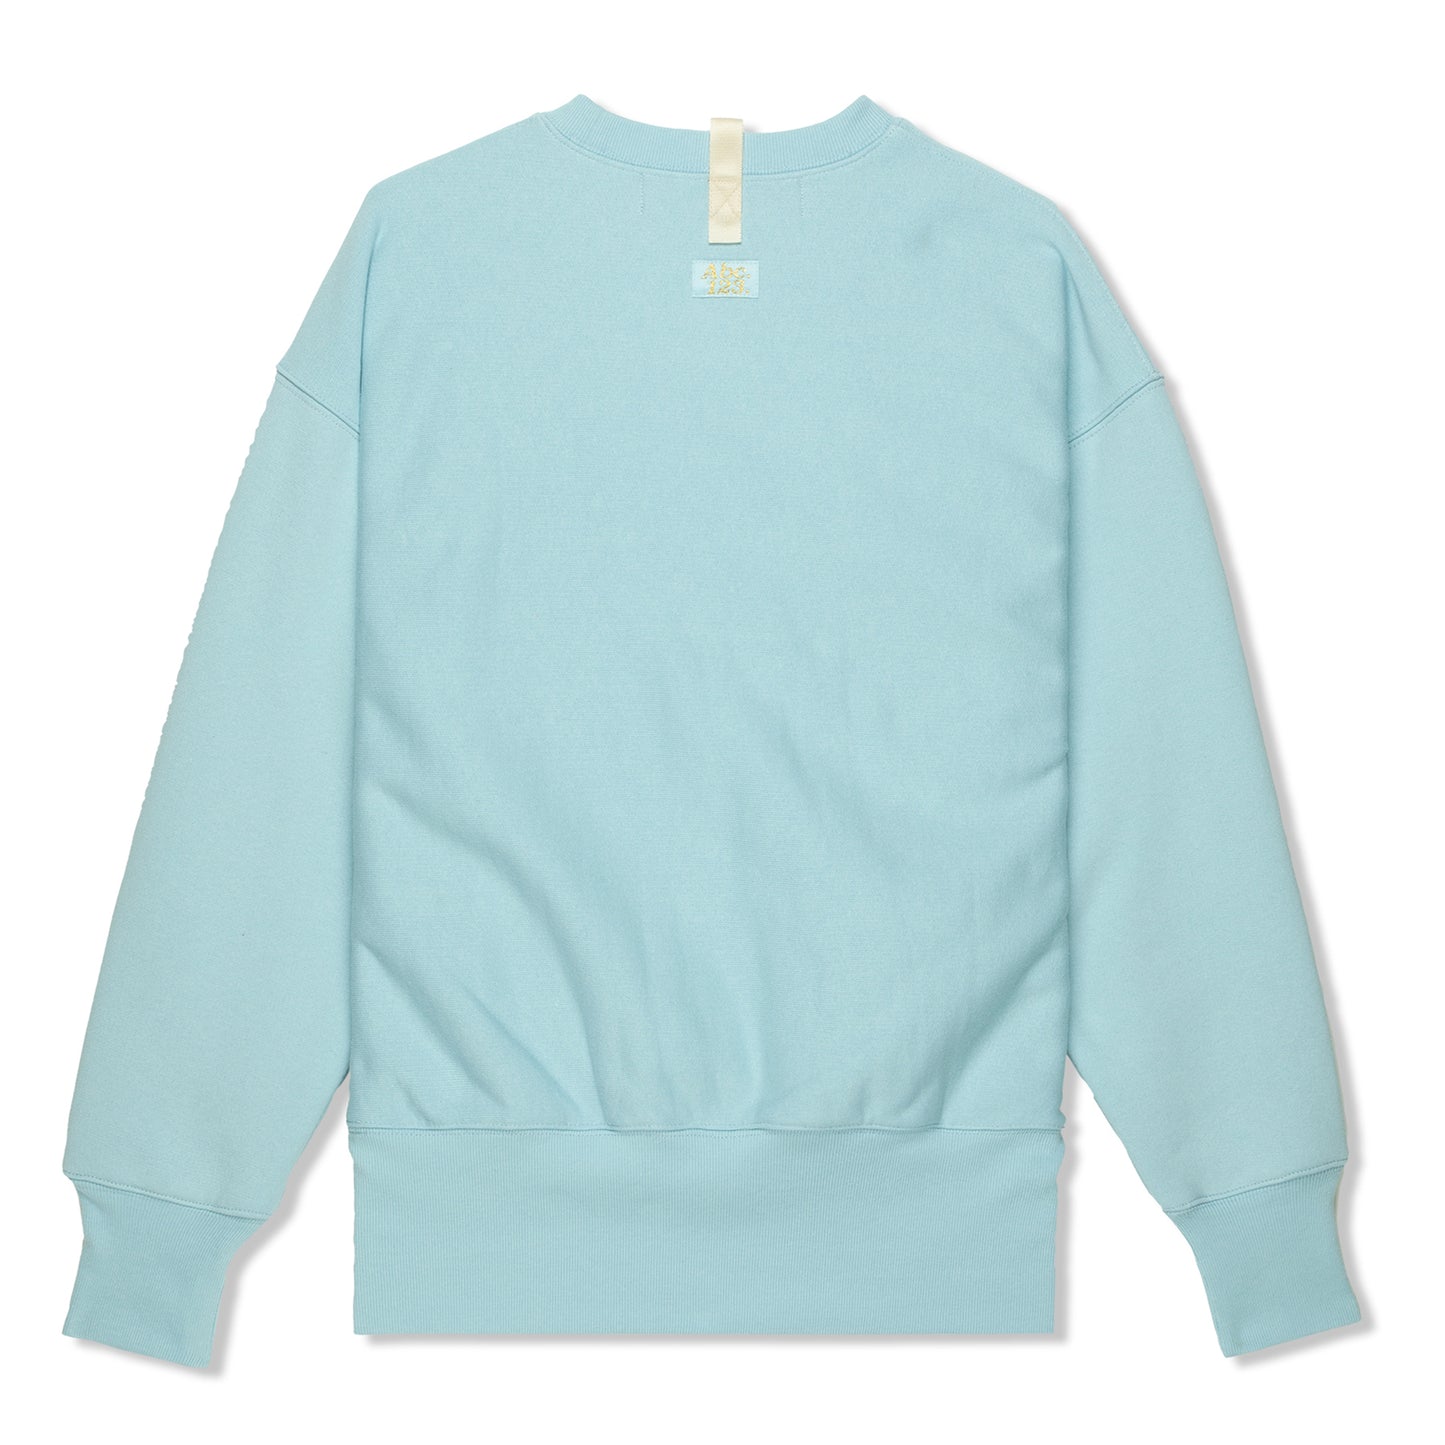 Advisory Board Crystals Abc. 123. Fleece Crewneck with Waffle Thermal (angelite blue)